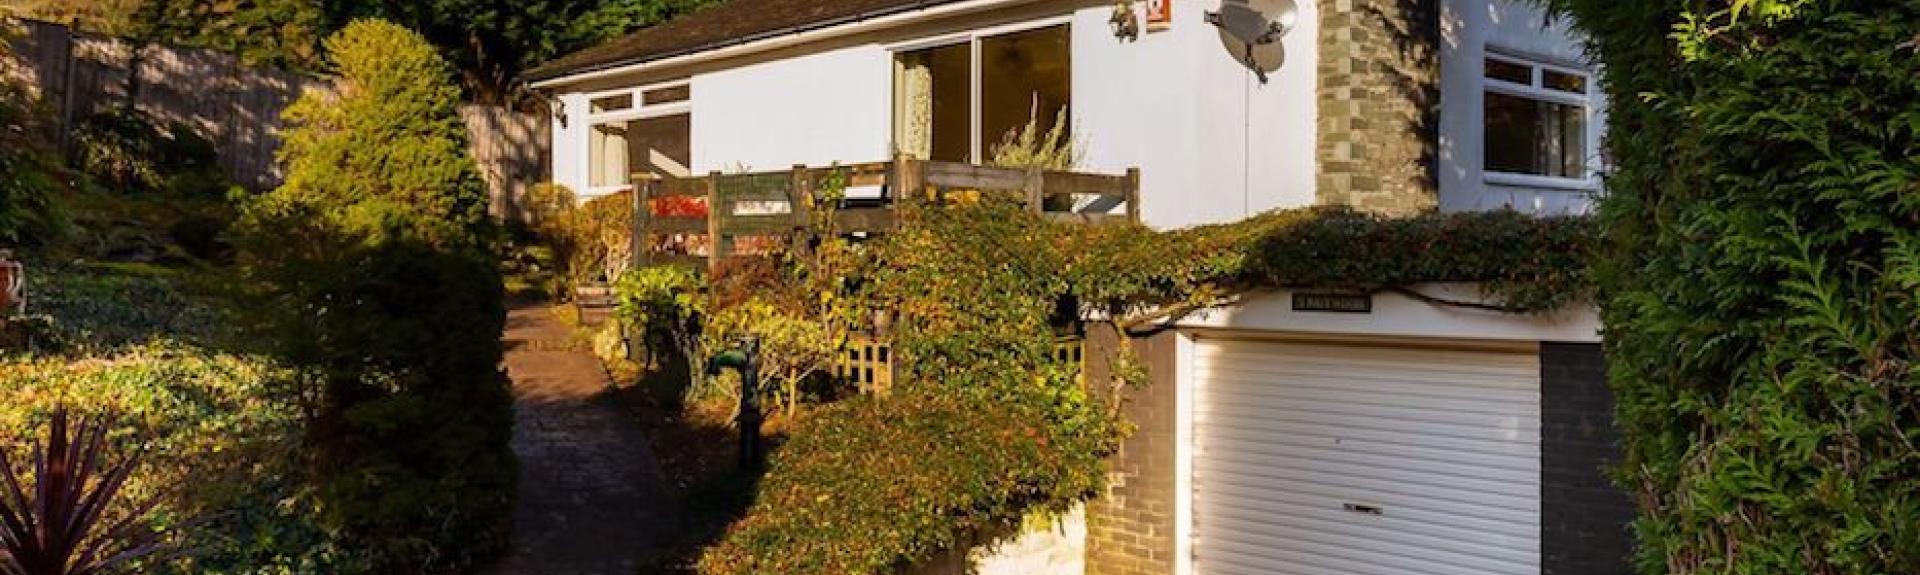 A modern house with a vine covered 1st floor balcony overlooks a shrub-filled front garden.